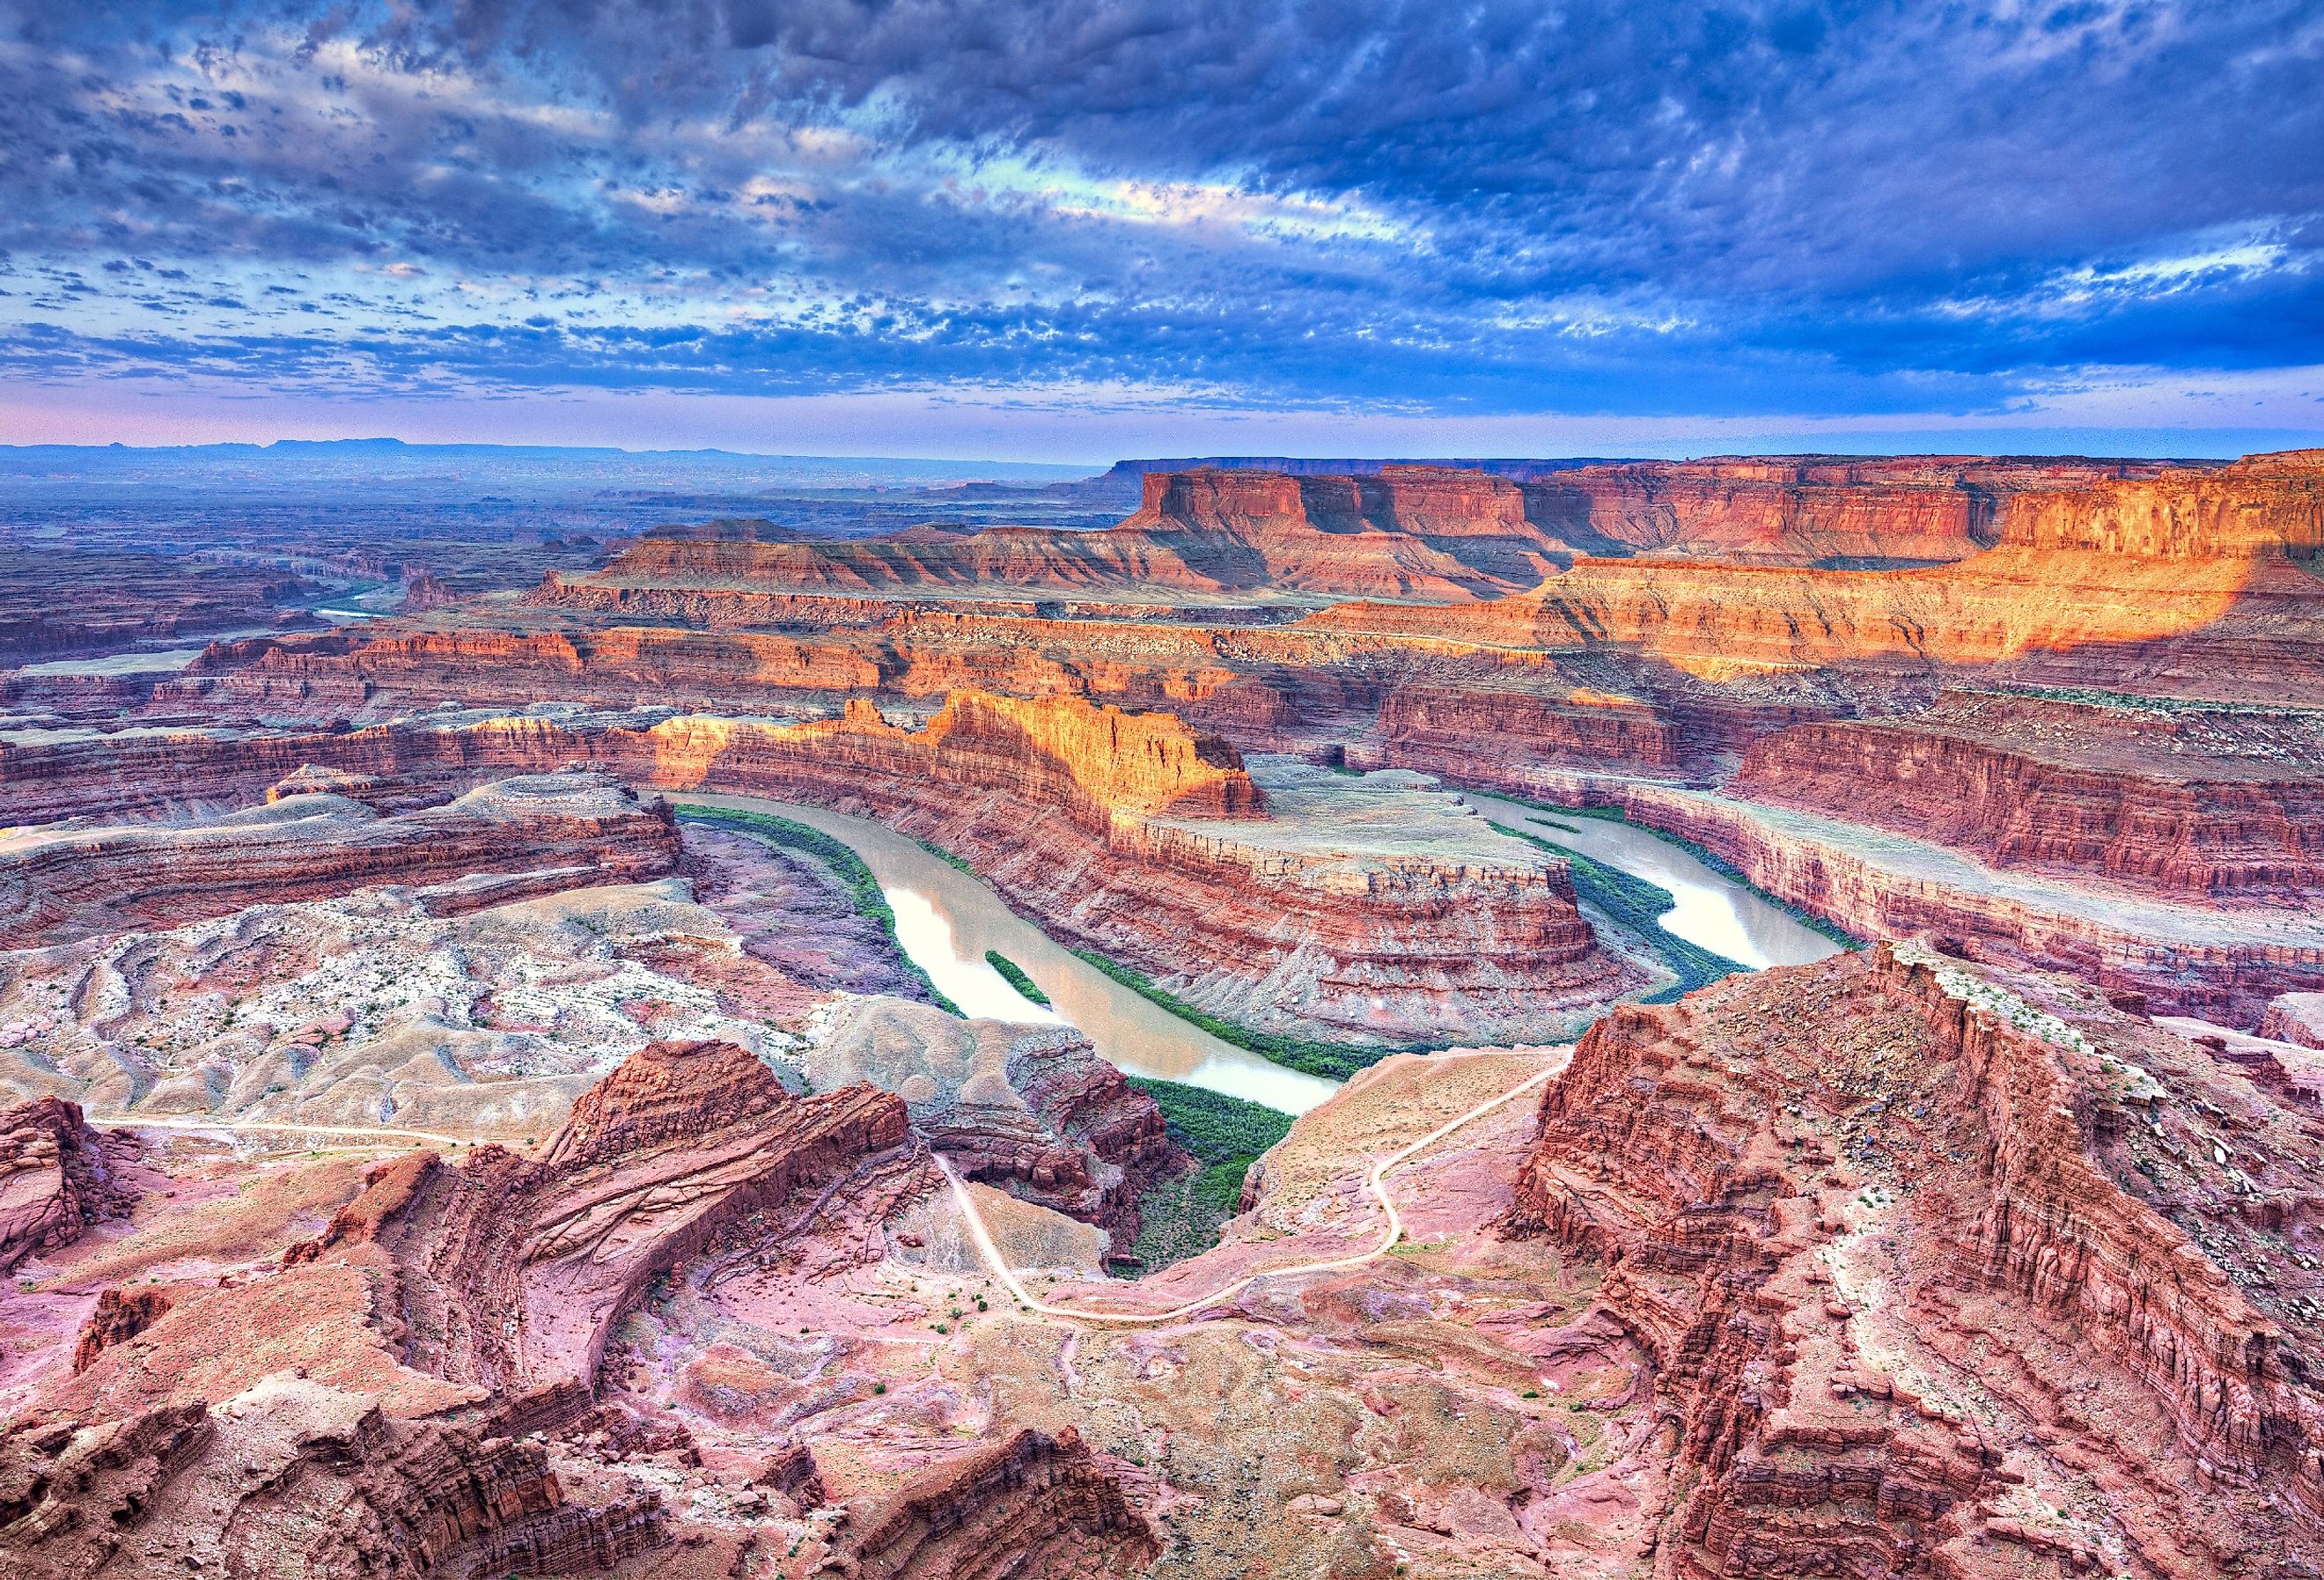 Sunrise illuminates clouds and the canyon walls of this colorful sunrise scene from Dead Horse Point, Utah.